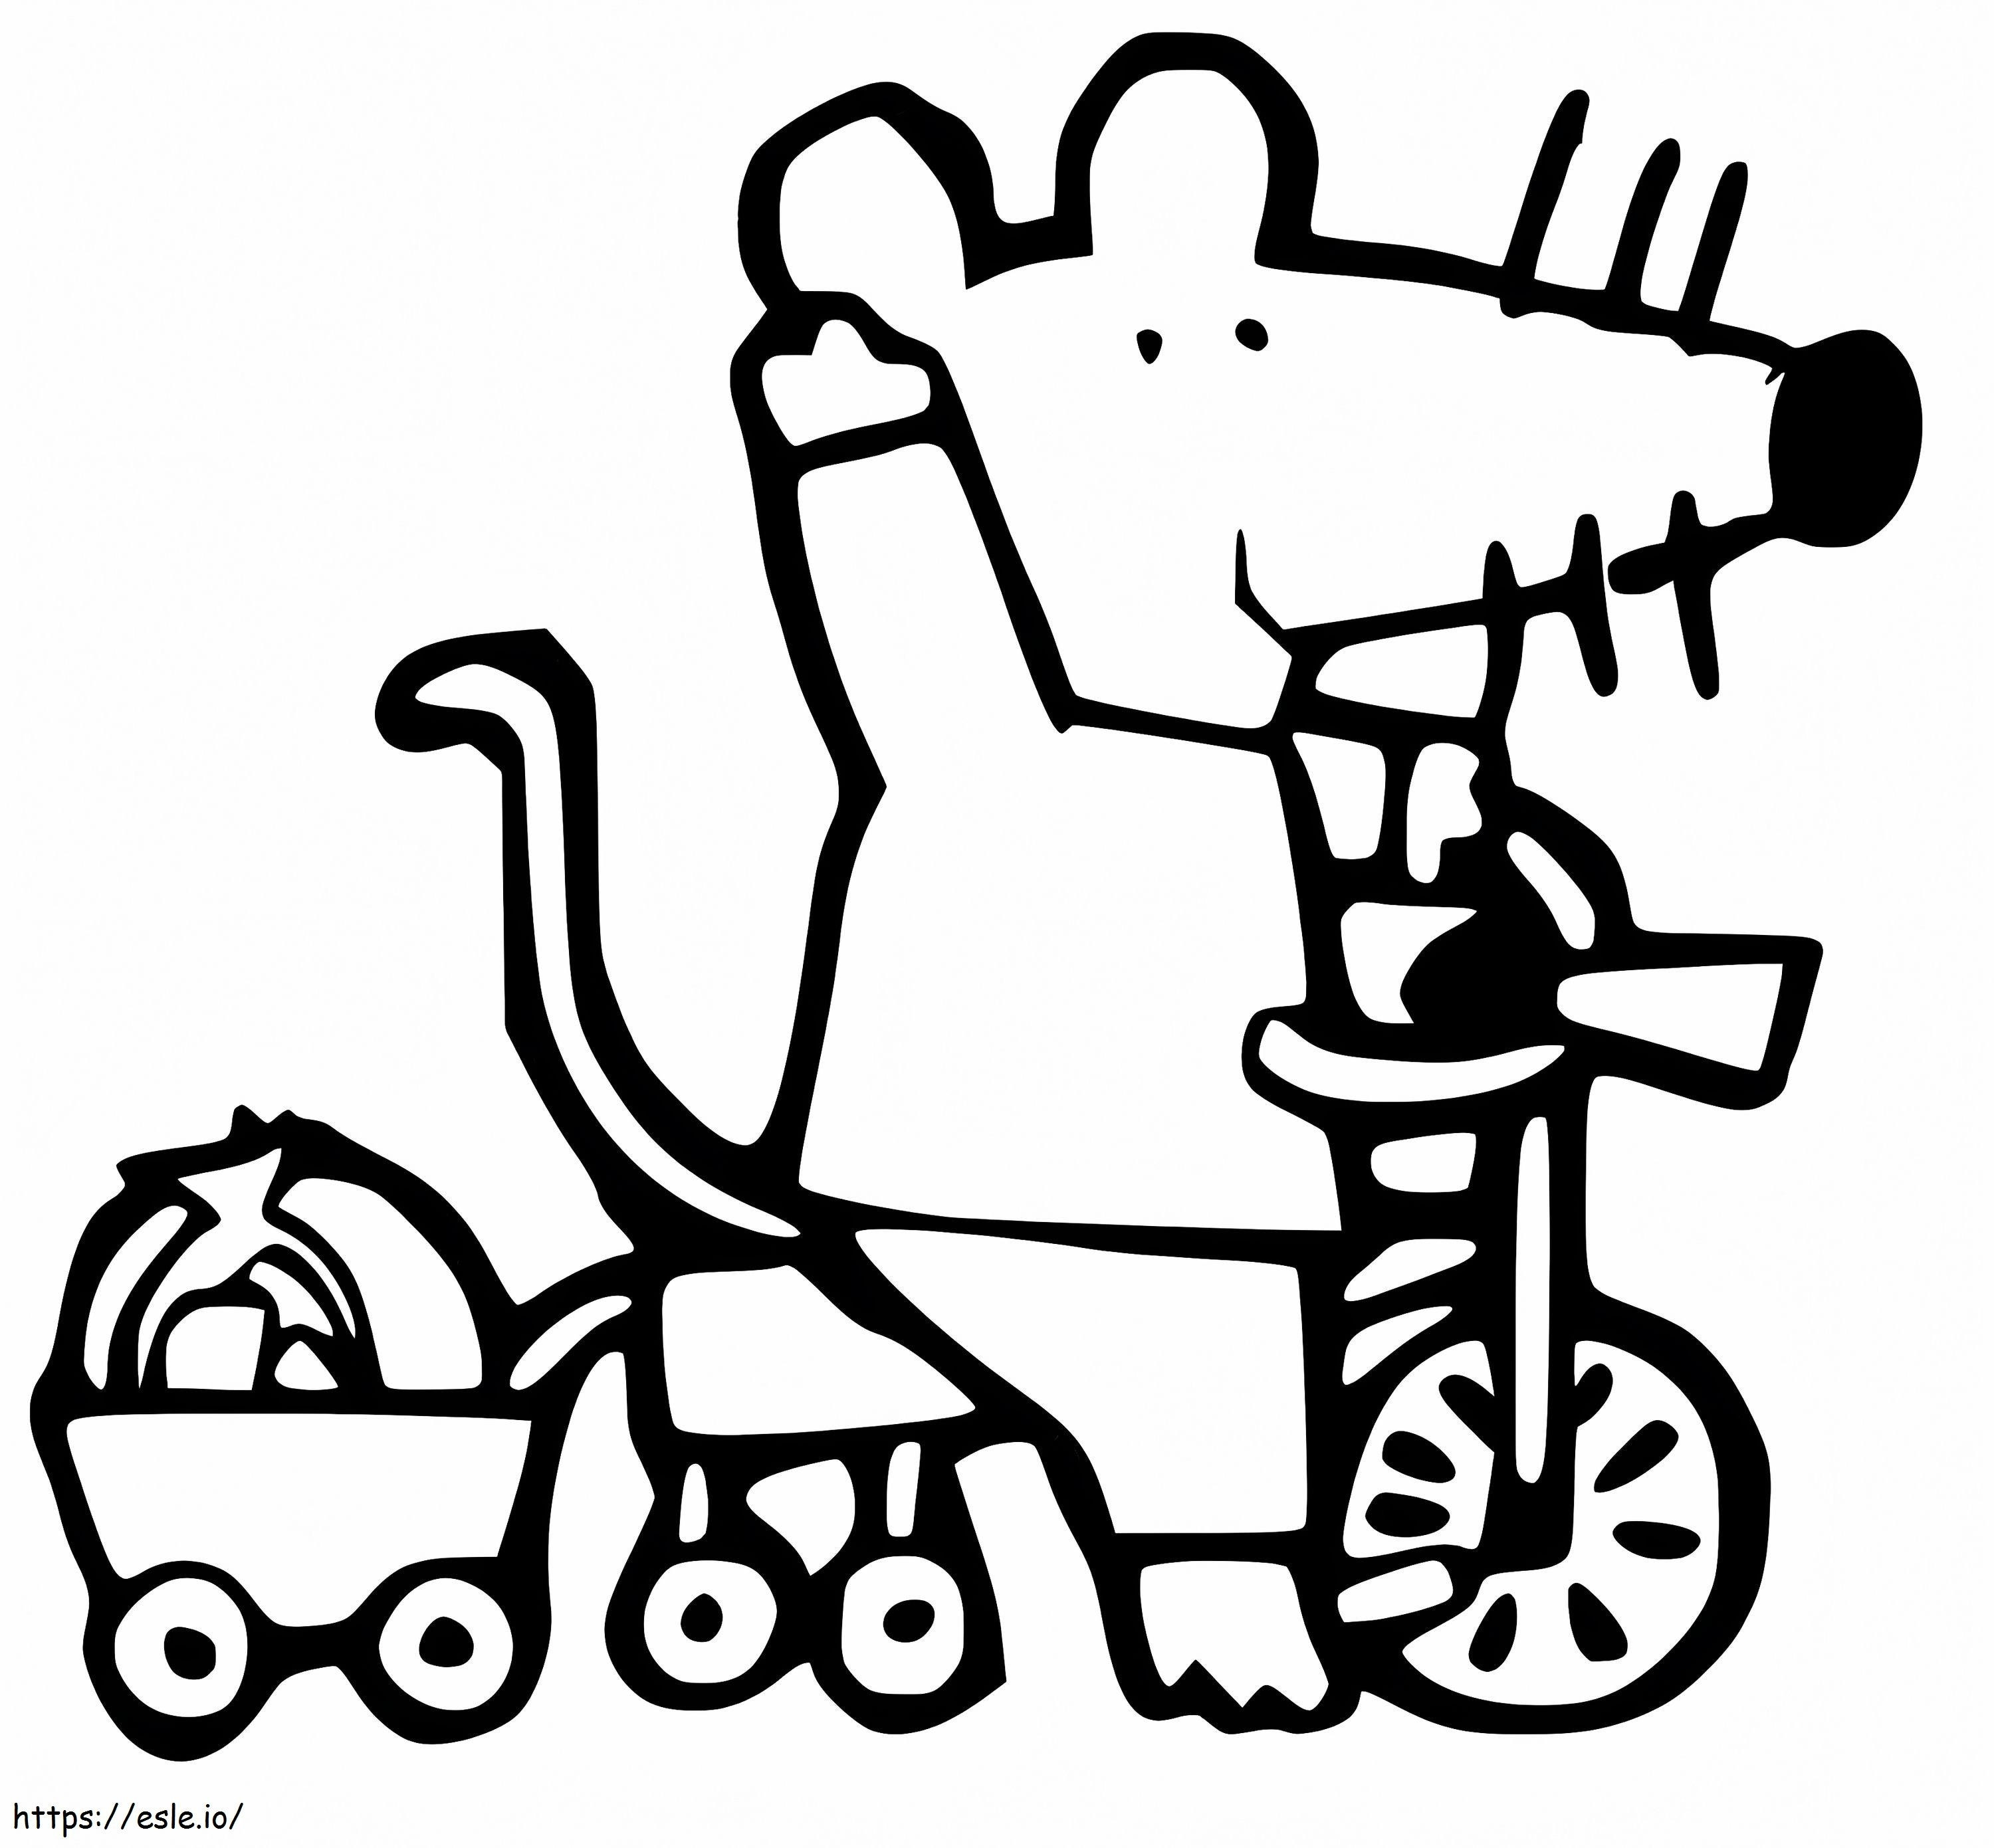 Happy Maisy coloring page